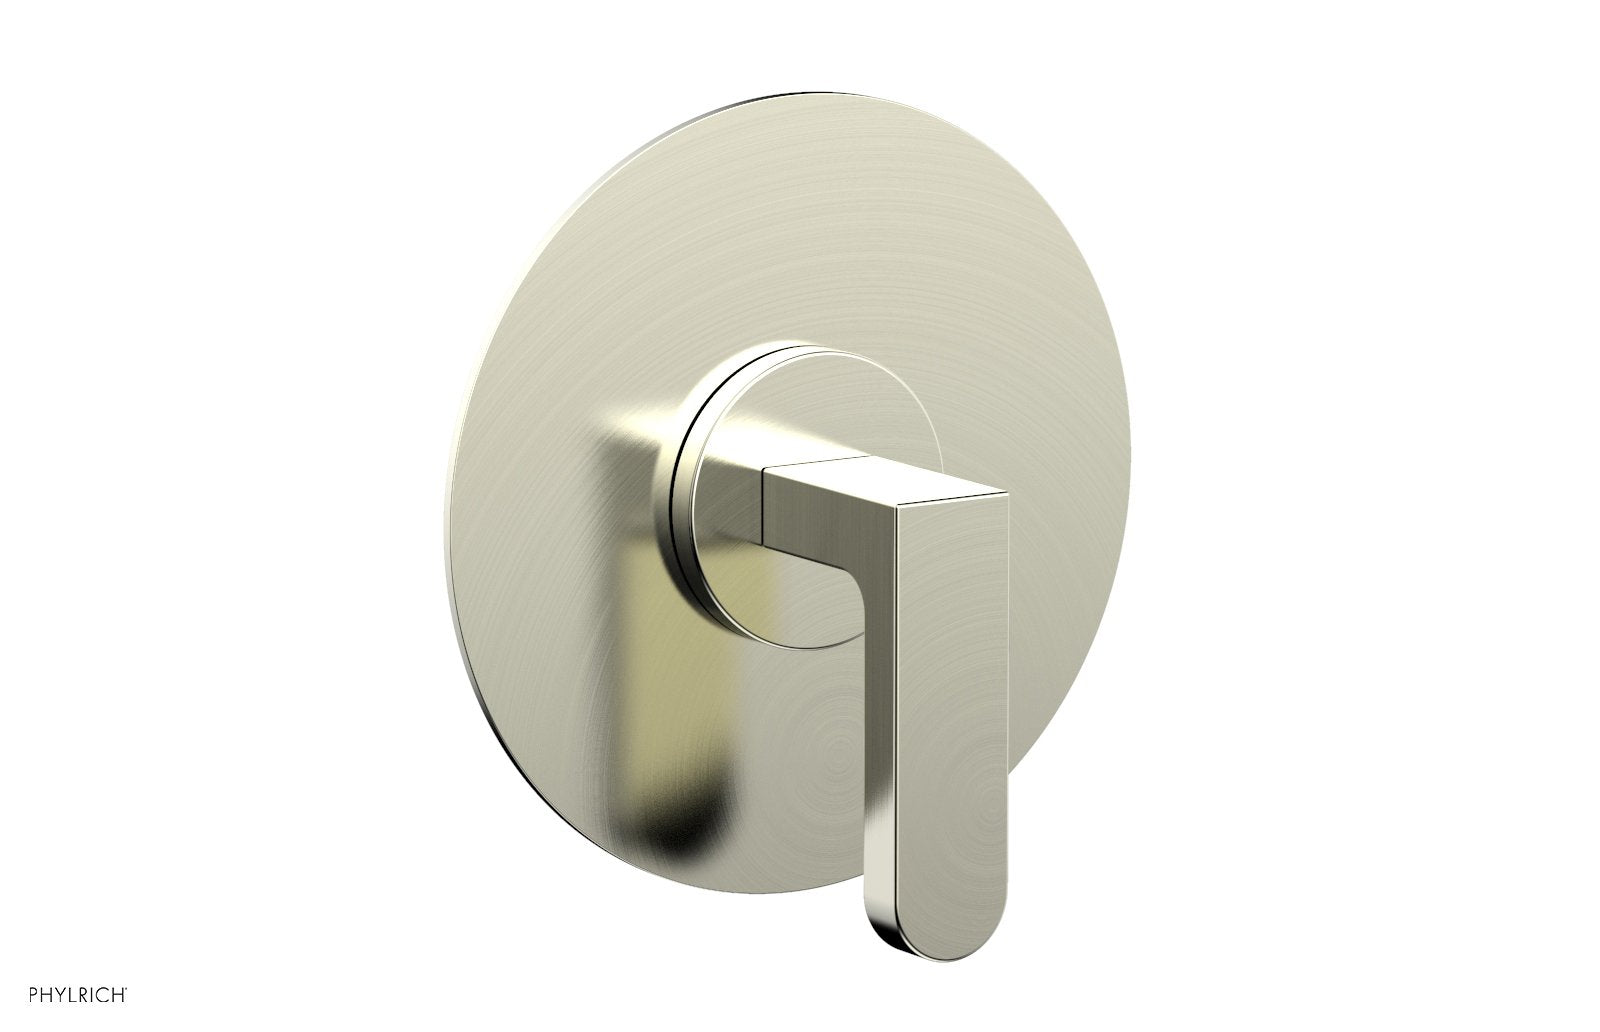 Phylrich ROND Thermostatic or Pressue Balance Shower Trim, Lever Handle